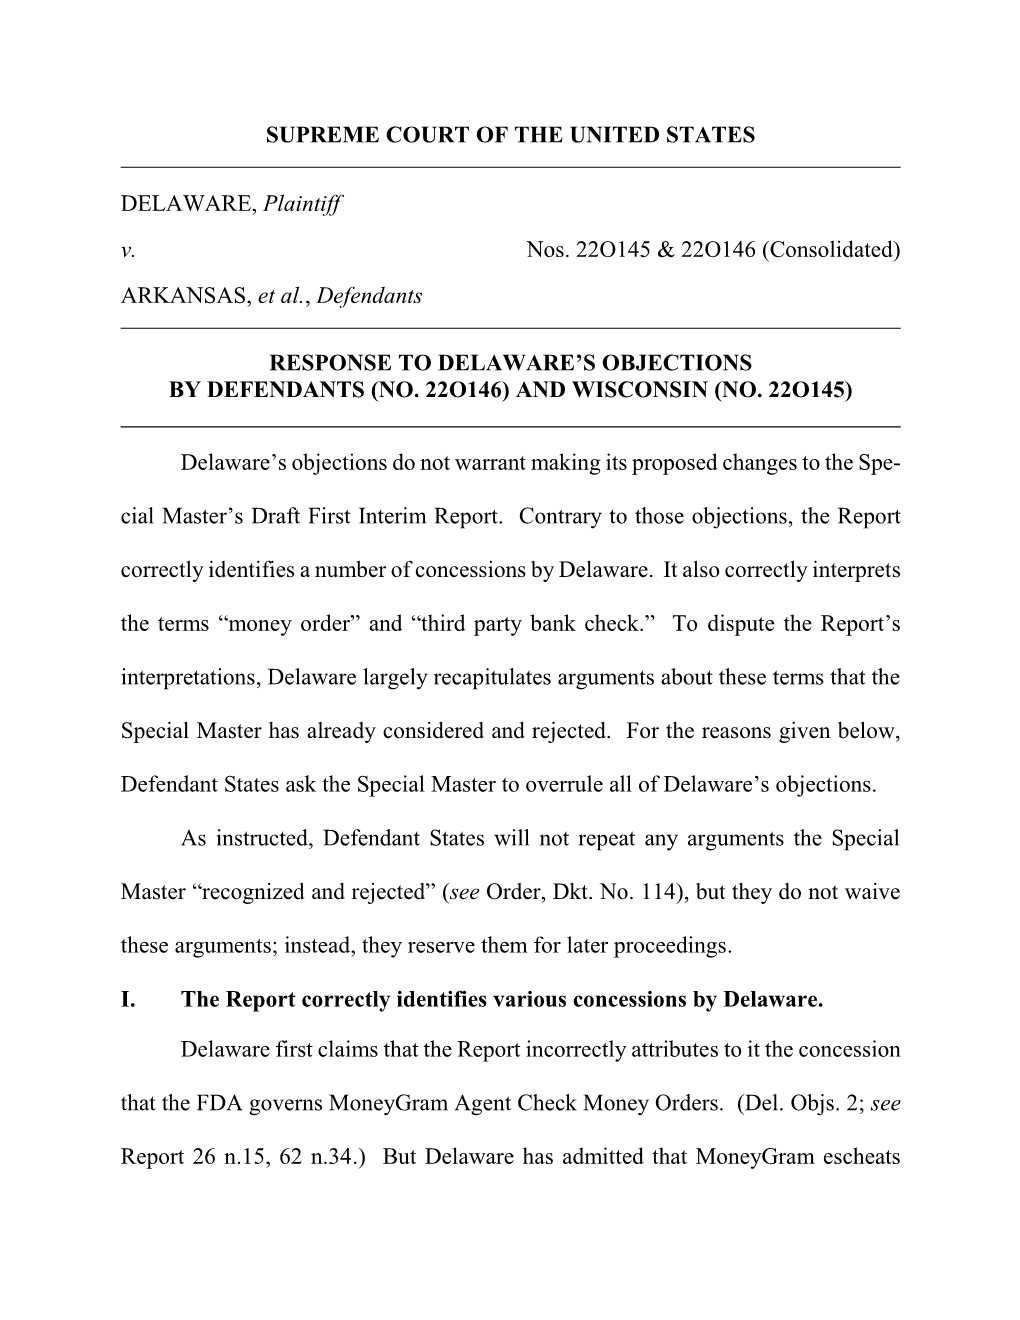 Defendant States' Response to Delaware's Objections